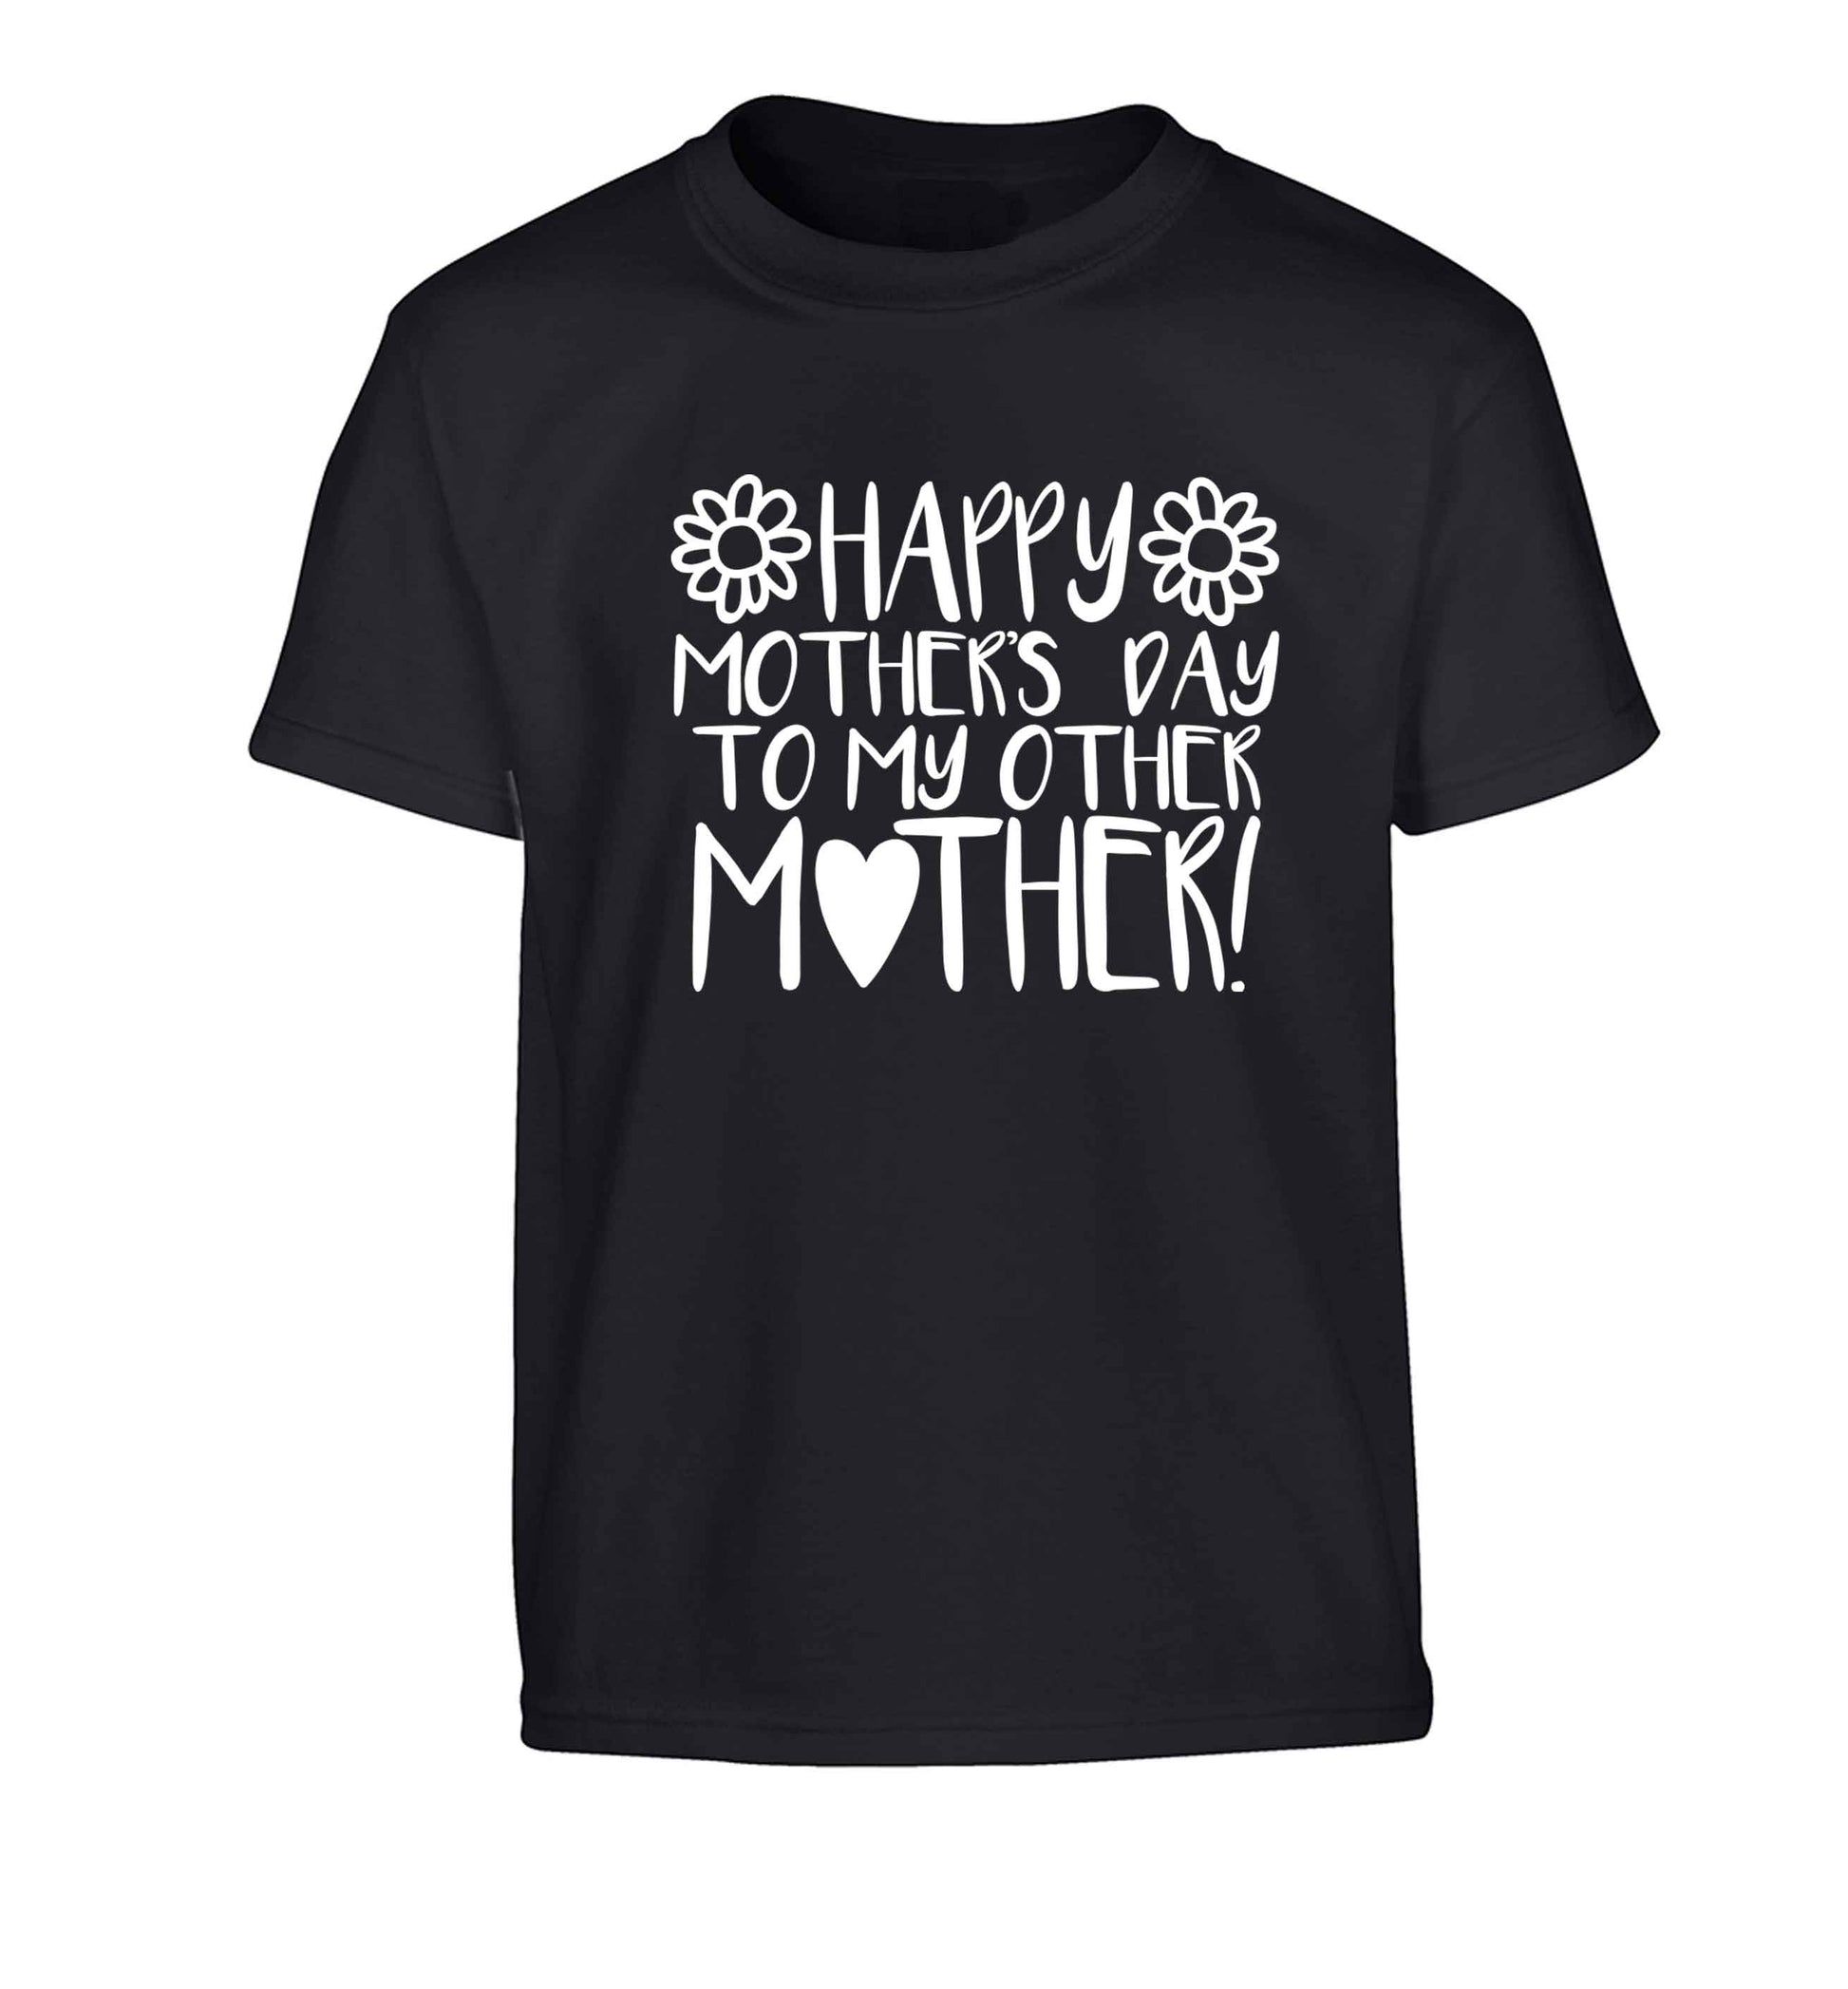 Happy mother's day to my other mother Children's black Tshirt 12-13 Years